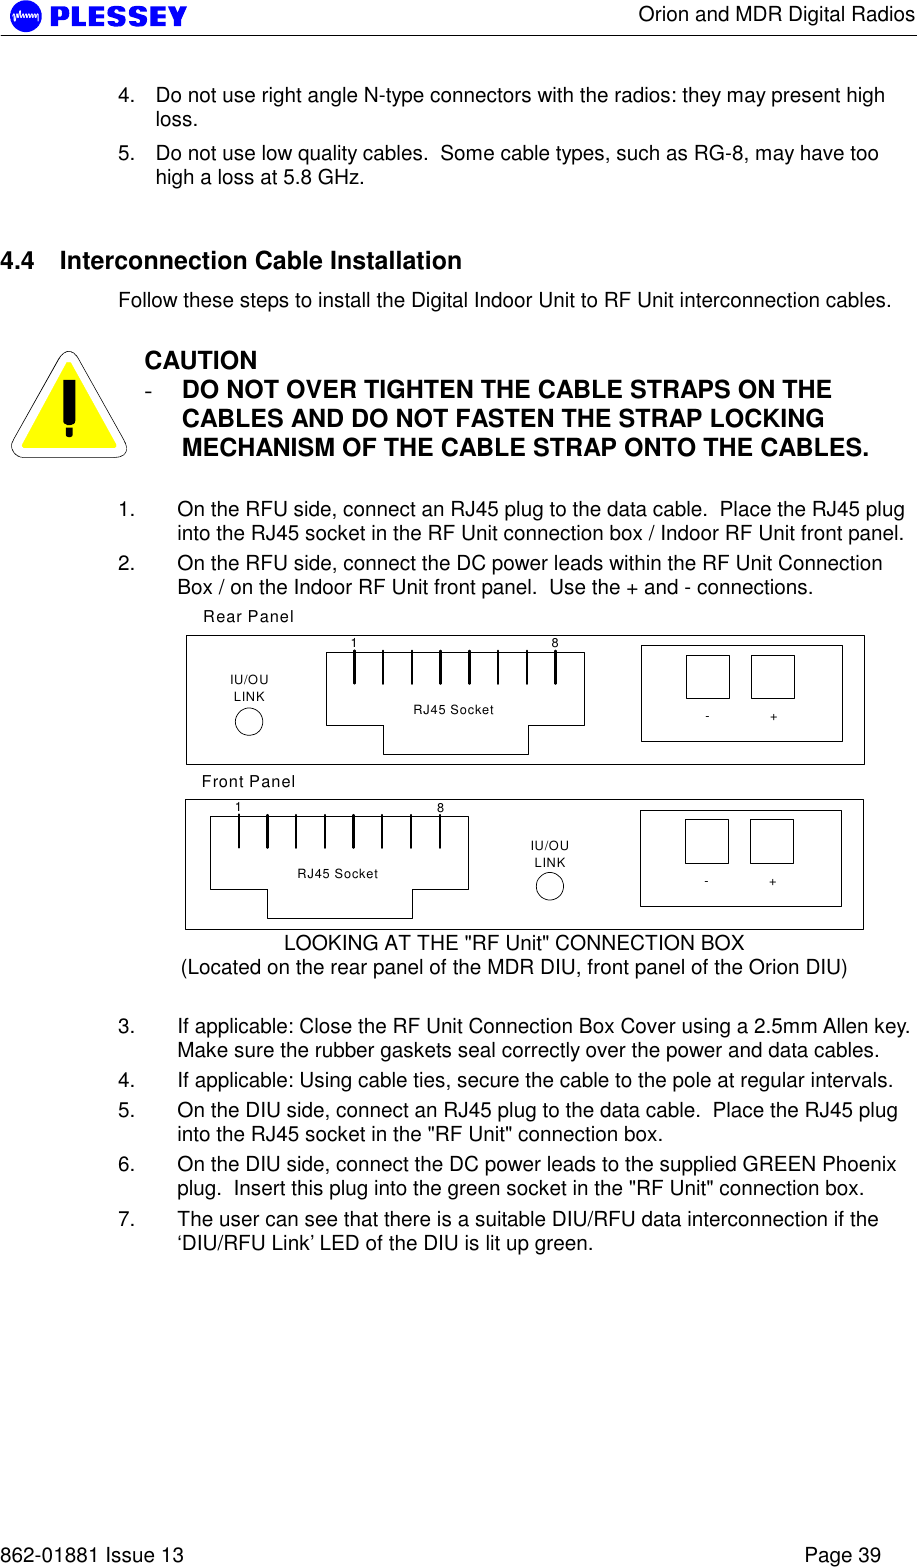      Orion and MDR Digital Radios   862-01881 Issue 13    Page 39 4.  Do not use right angle N-type connectors with the radios: they may present high loss.  5.  Do not use low quality cables.  Some cable types, such as RG-8, may have too high a loss at 5.8 GHz.   4.4  Interconnection Cable Installation Follow these steps to install the Digital Indoor Unit to RF Unit interconnection cables.   CAUTION -  DO NOT OVER TIGHTEN THE CABLE STRAPS ON THE CABLES AND DO NOT FASTEN THE STRAP LOCKING MECHANISM OF THE CABLE STRAP ONTO THE CABLES.  1.  On the RFU side, connect an RJ45 plug to the data cable.  Place the RJ45 plug into the RJ45 socket in the RF Unit connection box / Indoor RF Unit front panel. 2.  On the RFU side, connect the DC power leads within the RF Unit Connection Box / on the Indoor RF Unit front panel.  Use the + and - connections. 18-+RJ45 SocketIU/OULINK18-+RJ45 SocketIU/OULINKRear PanelFront Panel LOOKING AT THE &quot;RF Unit&quot; CONNECTION BOX (Located on the rear panel of the MDR DIU, front panel of the Orion DIU)  3.  If applicable: Close the RF Unit Connection Box Cover using a 2.5mm Allen key.  Make sure the rubber gaskets seal correctly over the power and data cables. 4.  If applicable: Using cable ties, secure the cable to the pole at regular intervals.  5.  On the DIU side, connect an RJ45 plug to the data cable.  Place the RJ45 plug into the RJ45 socket in the &quot;RF Unit&quot; connection box.   6.  On the DIU side, connect the DC power leads to the supplied GREEN Phoenix plug.  Insert this plug into the green socket in the &quot;RF Unit&quot; connection box. 7.  The user can see that there is a suitable DIU/RFU data interconnection if the ‘DIU/RFU Link’ LED of the DIU is lit up green.   